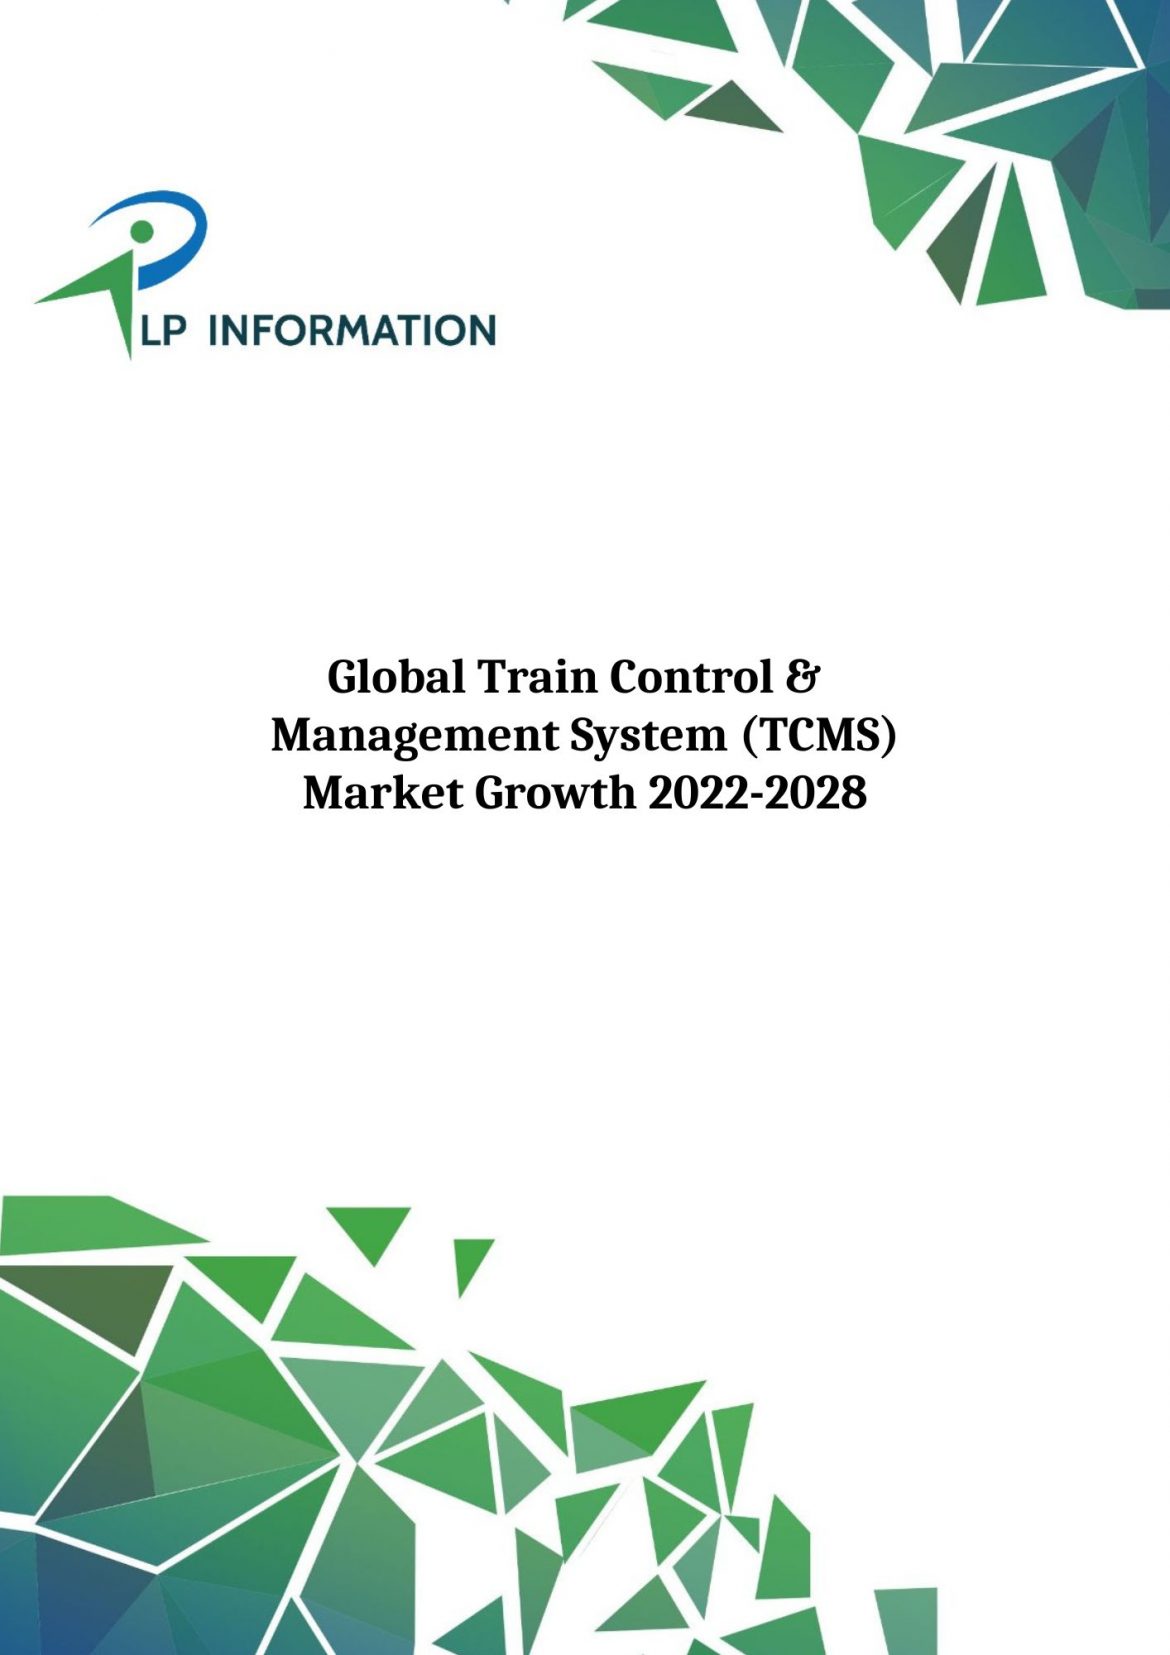 Global Train Control & Management System (TCMS) Market Growth 2022-2028